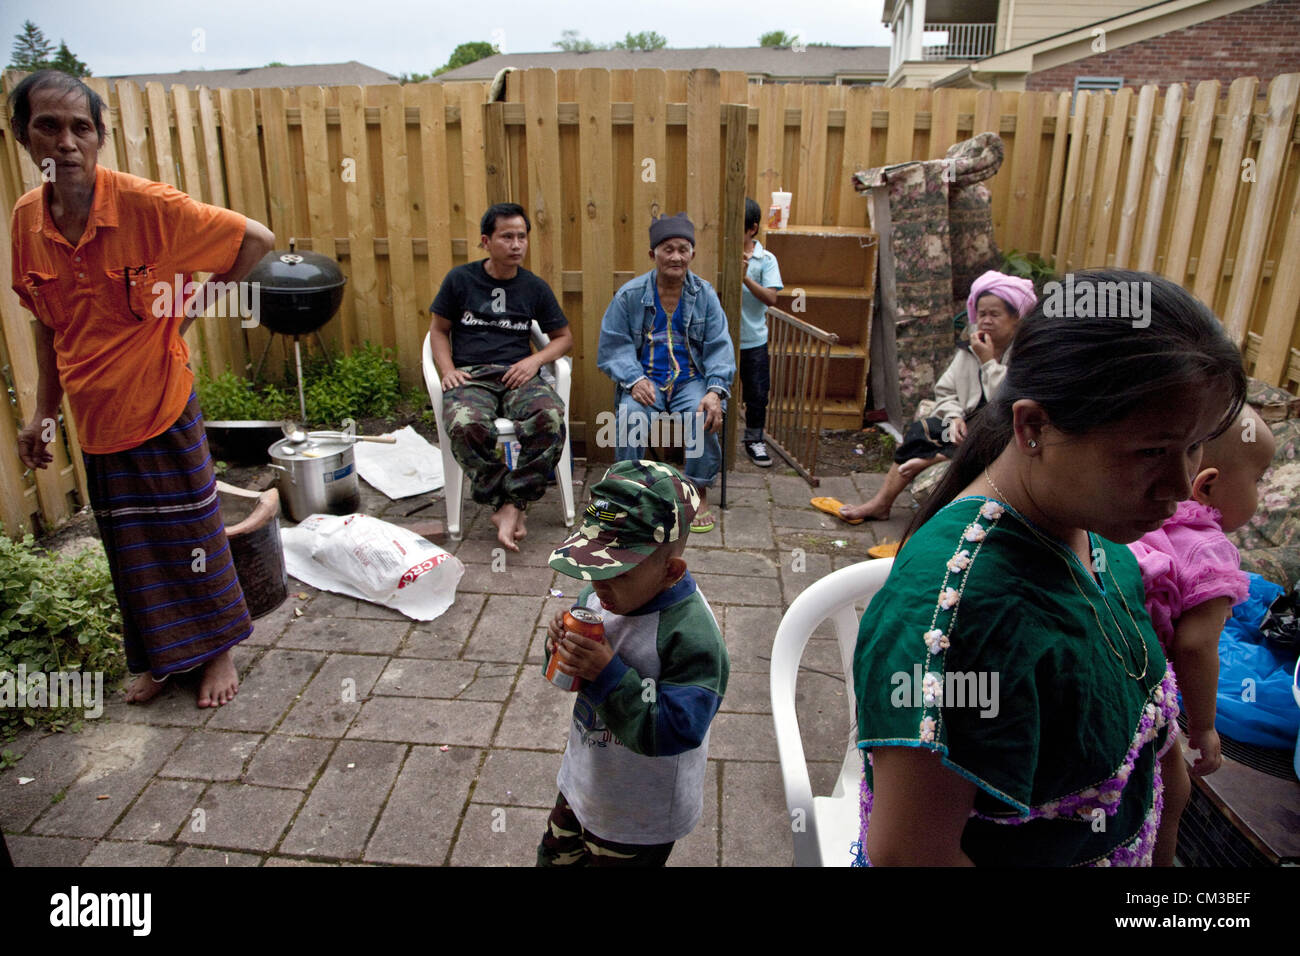 May 12, 2012 - Indianapolis, Indiana, U.S - In Indianapolis, Indiana a community of Karen and Karenni ethnic cultures, refugees from Myanmar (Burma) bordering with Thailand, share a new village much different from their native land.  Karenni ethnic Burmese refugee in the backyard at Lakeside Pointe apartments. (Credit Image: © Gary Dwight Miller/ZUMAPRESS.com) Stock Photo